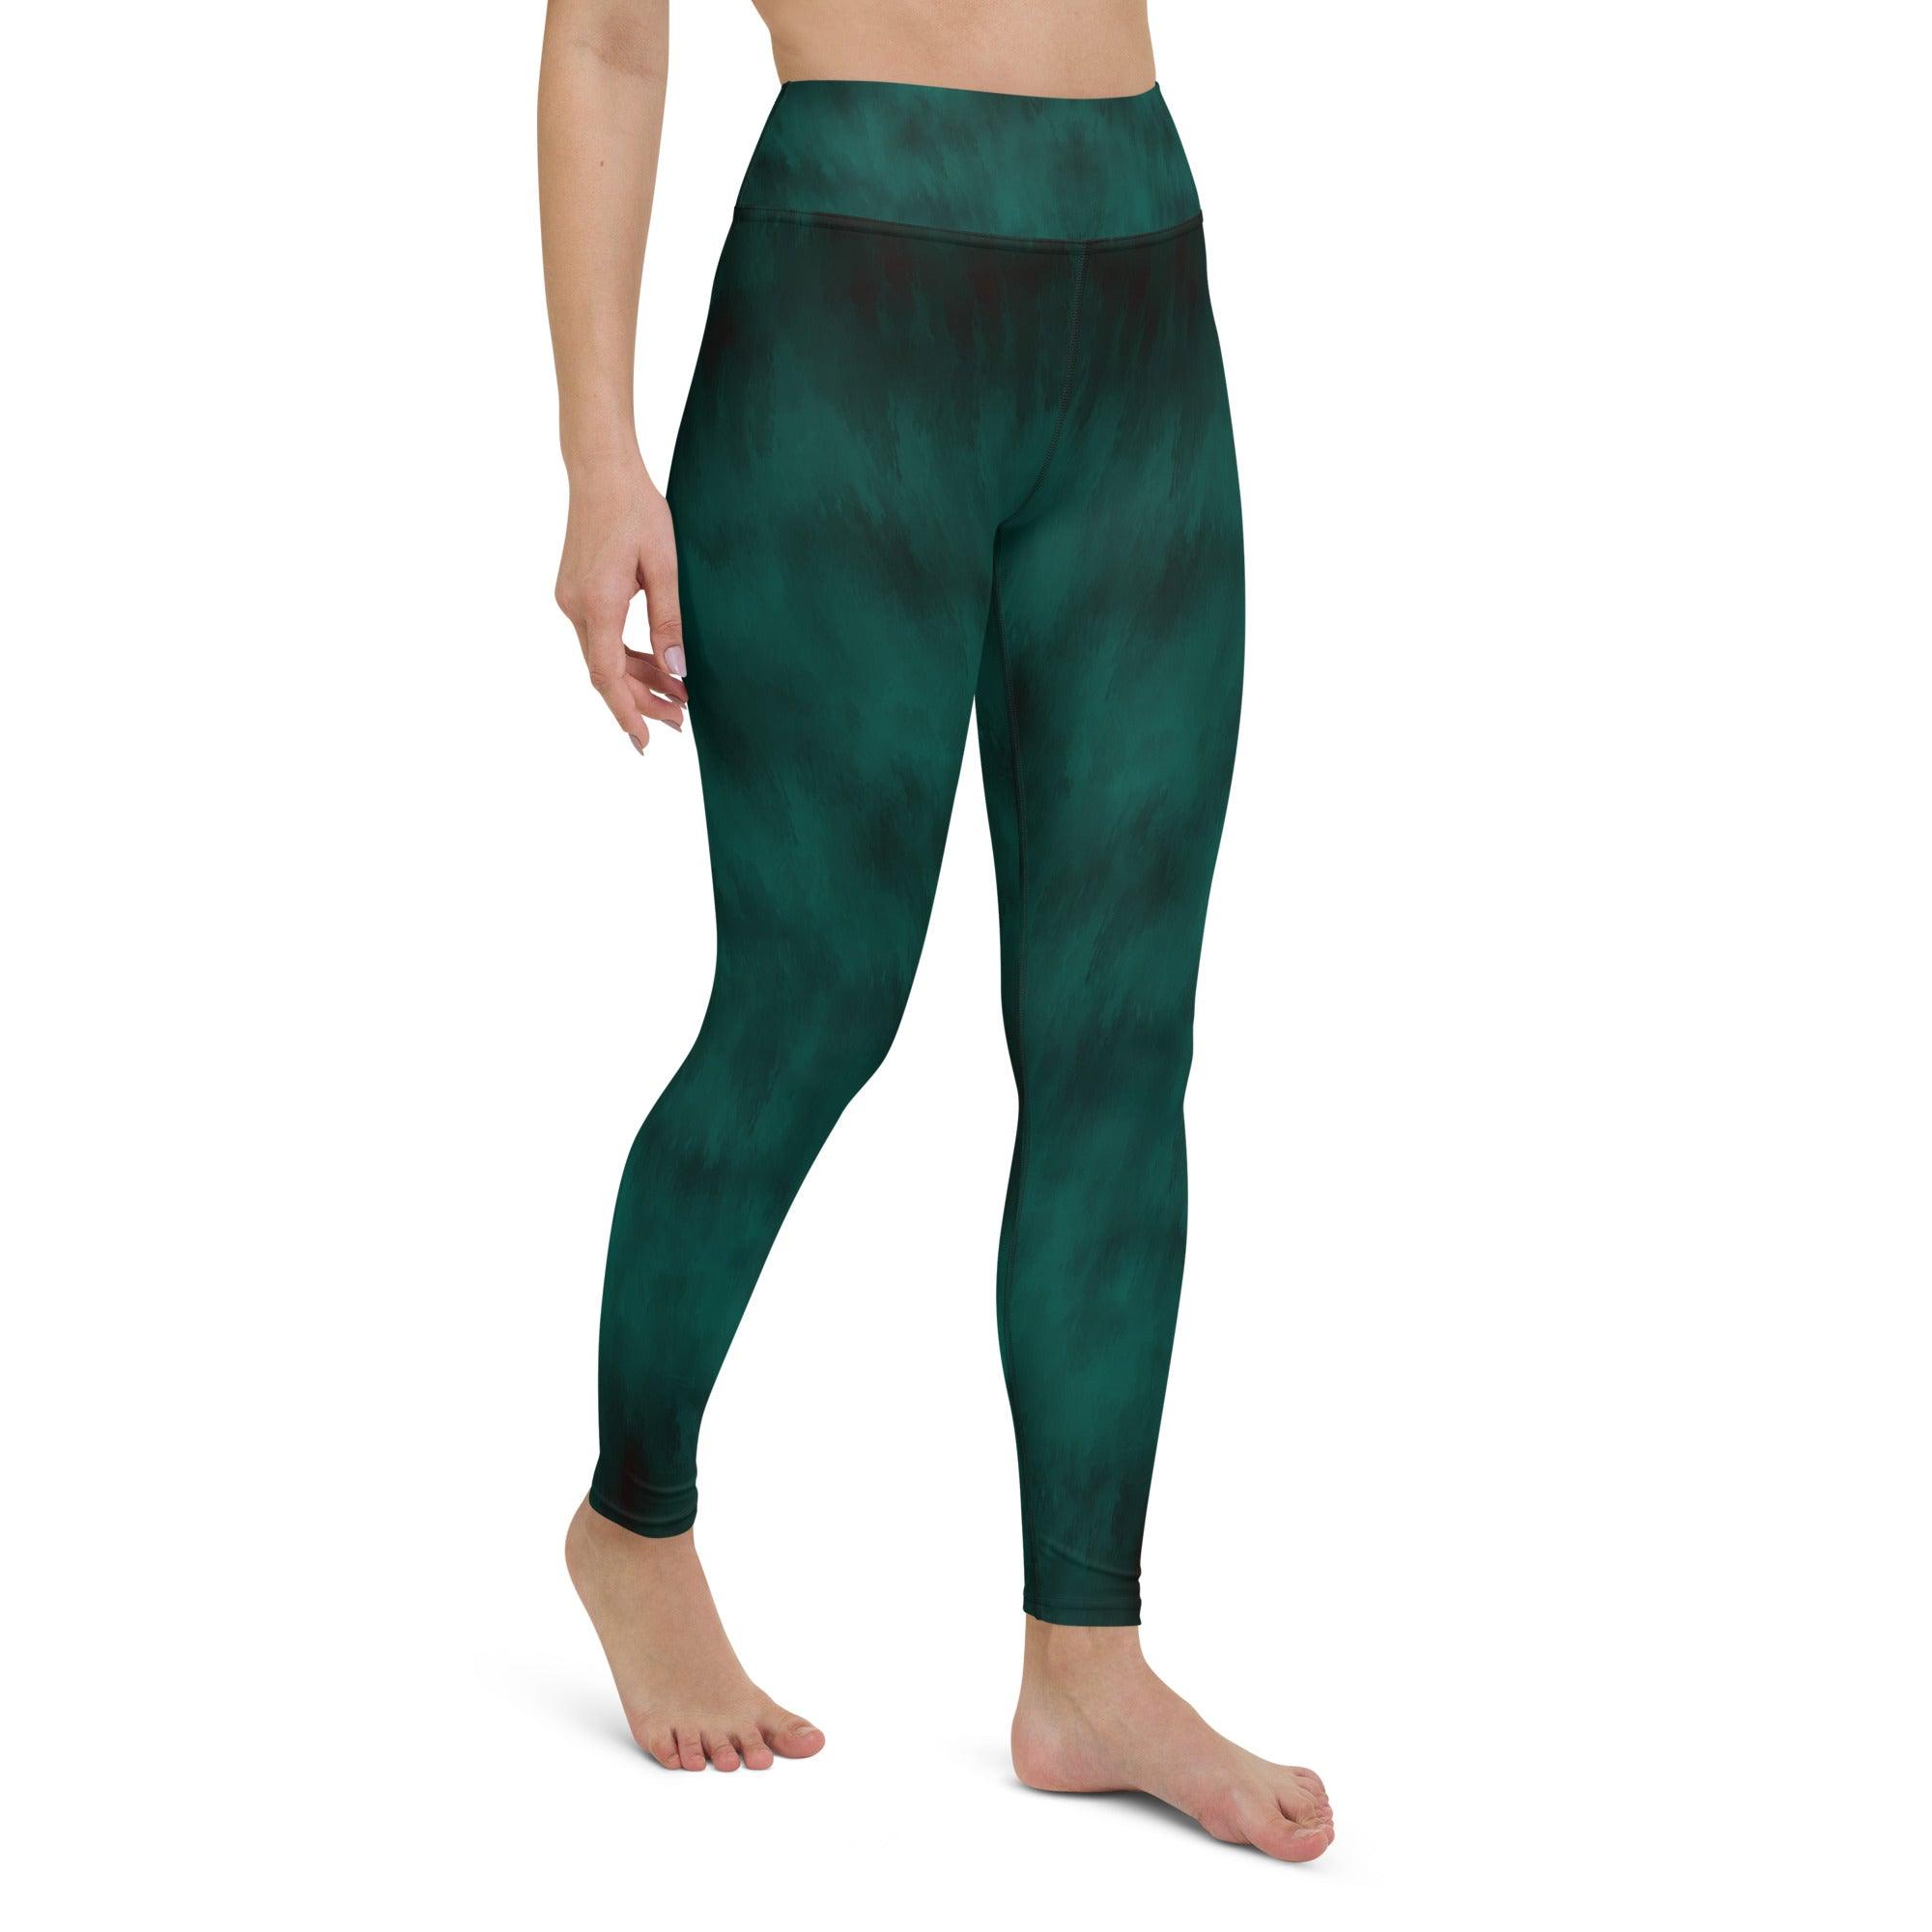 Celestial Glimmers Yoga Leggings front view.